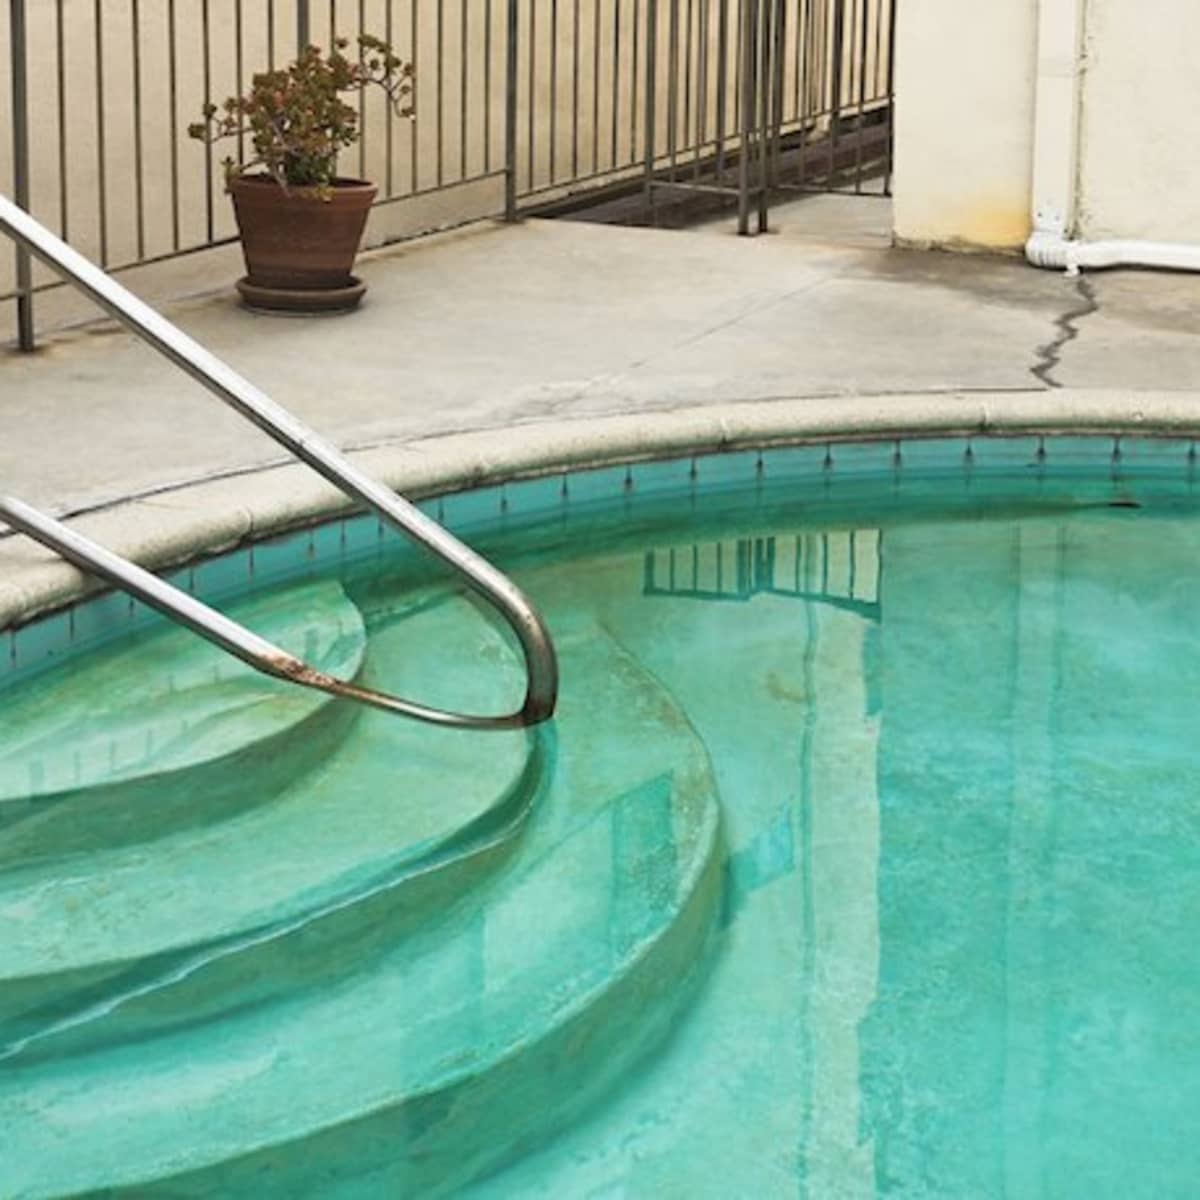 Metal Stains In Swimming Pools, How To Remove Stains From Inground Pool Steps